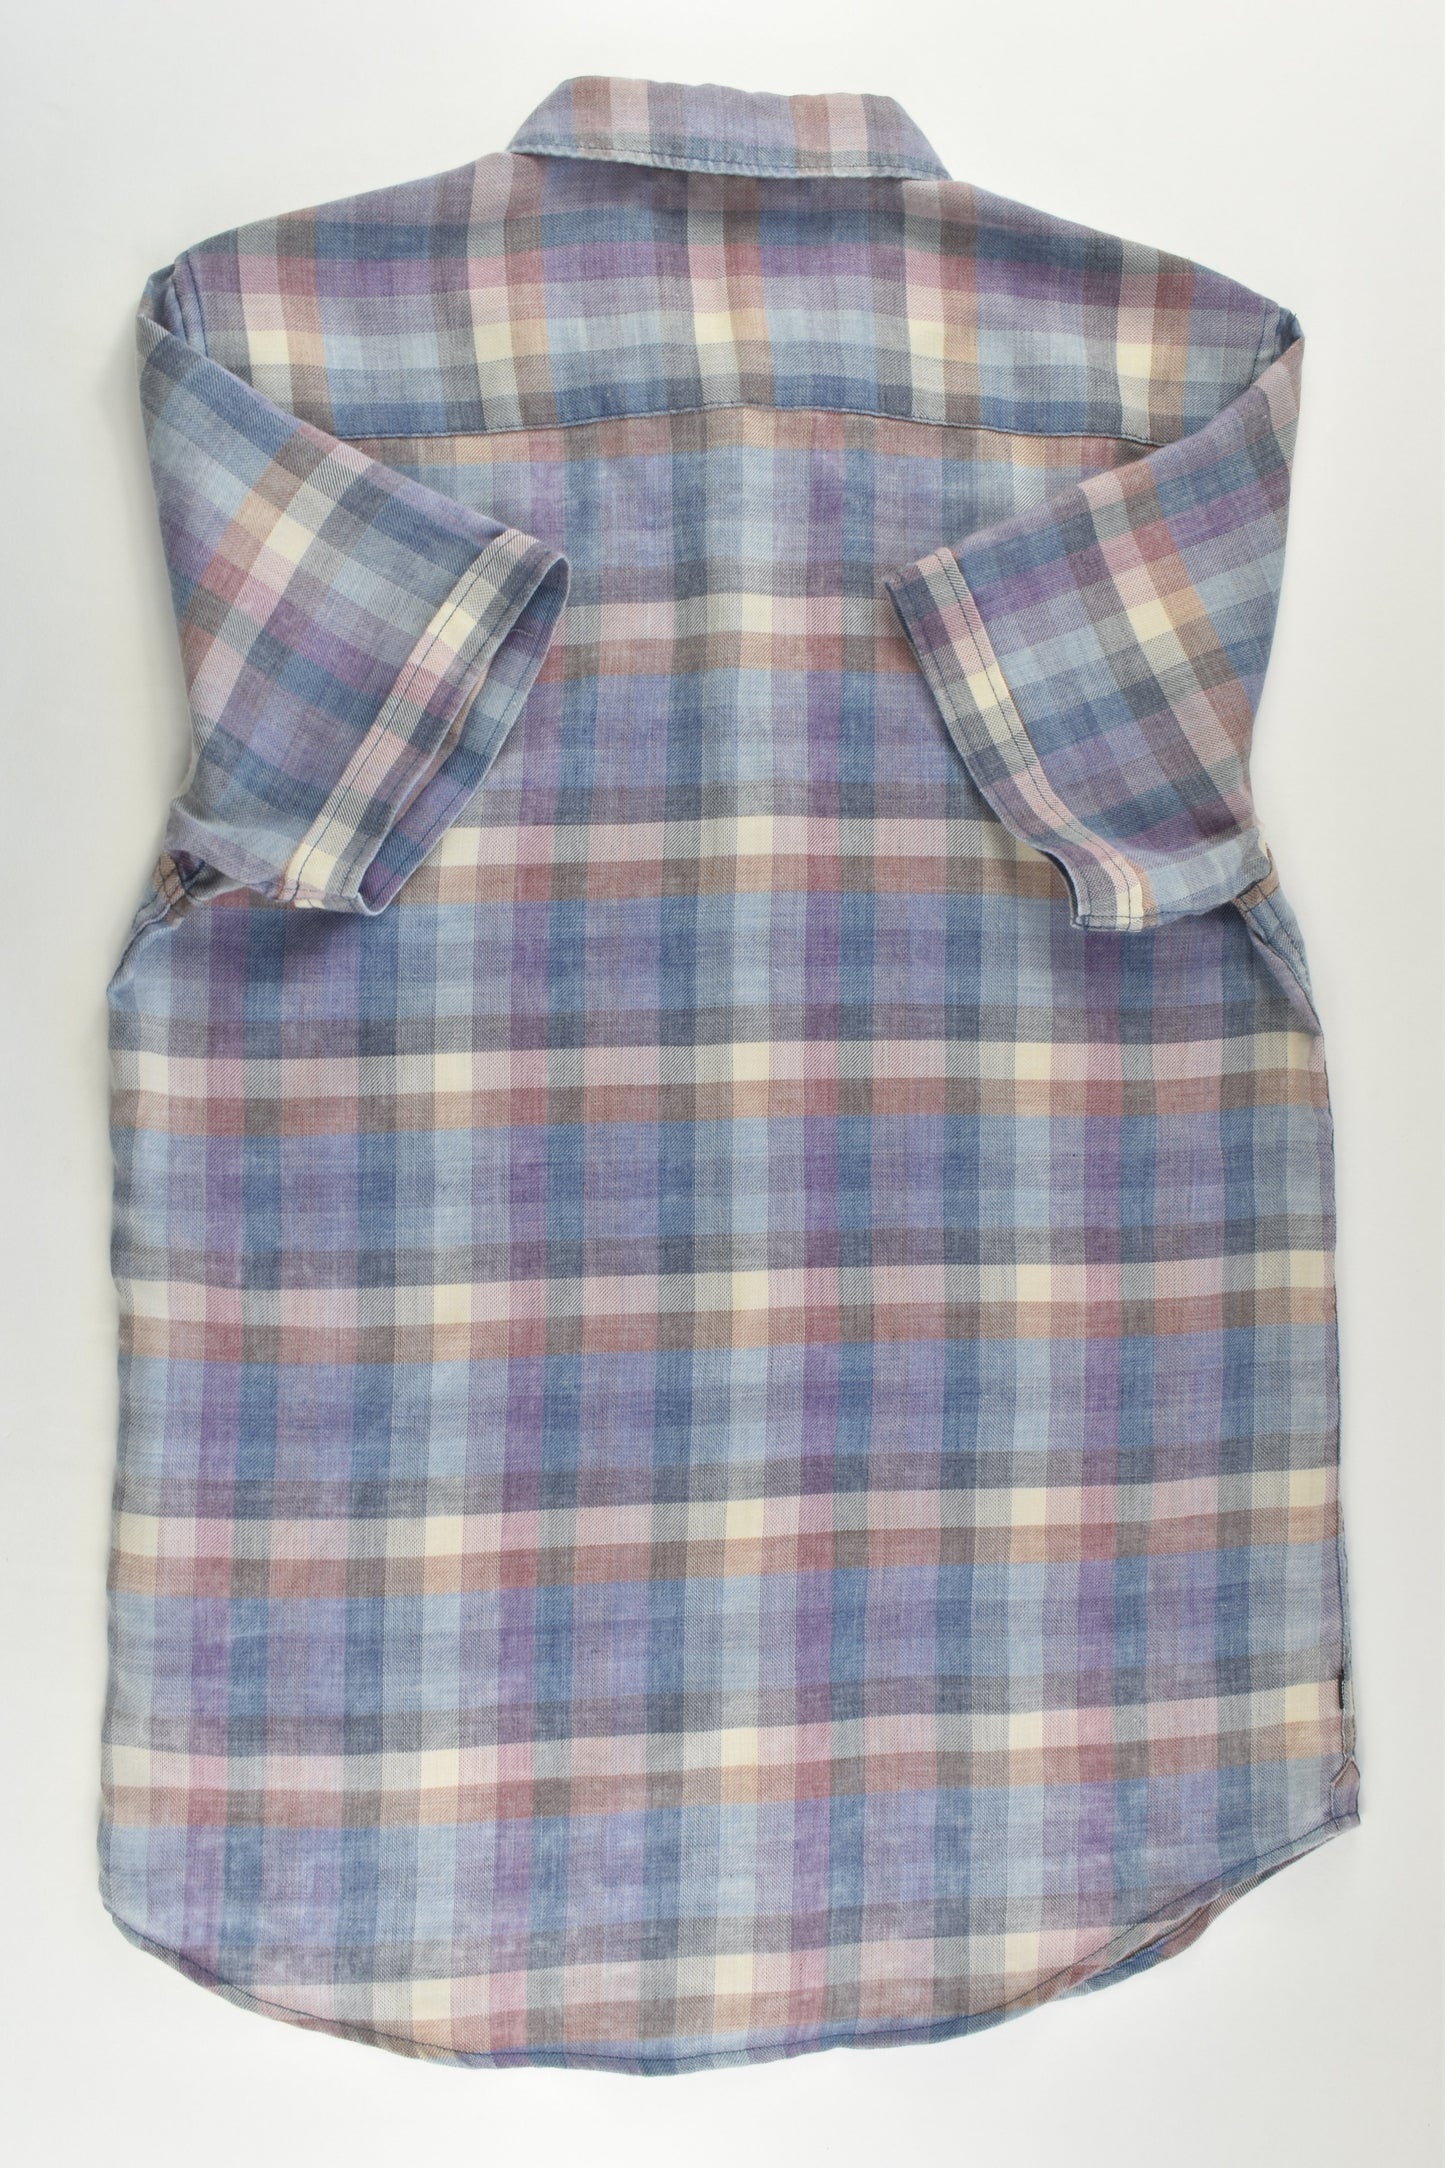 Indie Kids Size 14 Checked Shirt